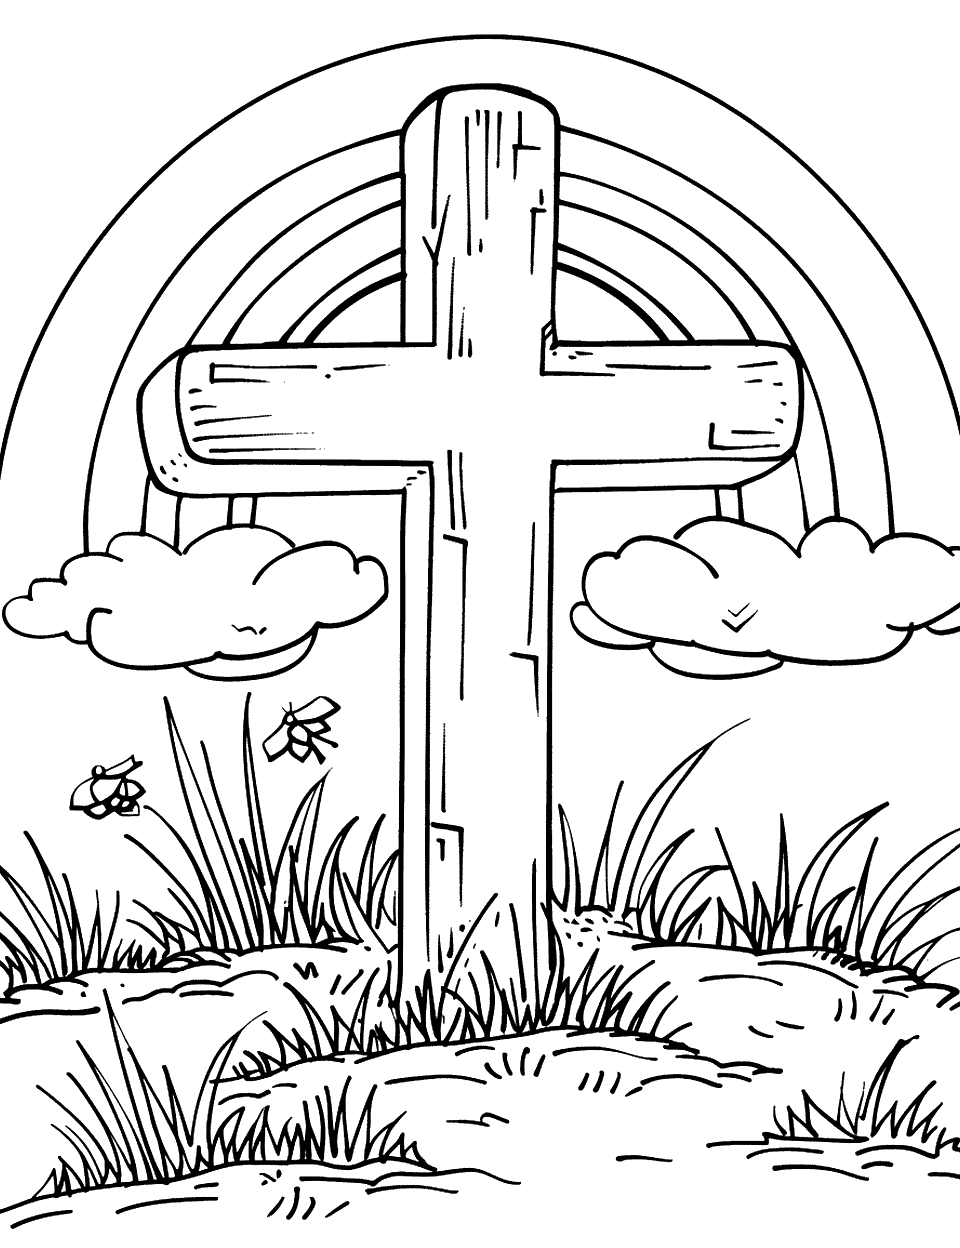 Rainbow Behind Cross Coloring Page - A large rainbow arching over a cross standing in a meadow.